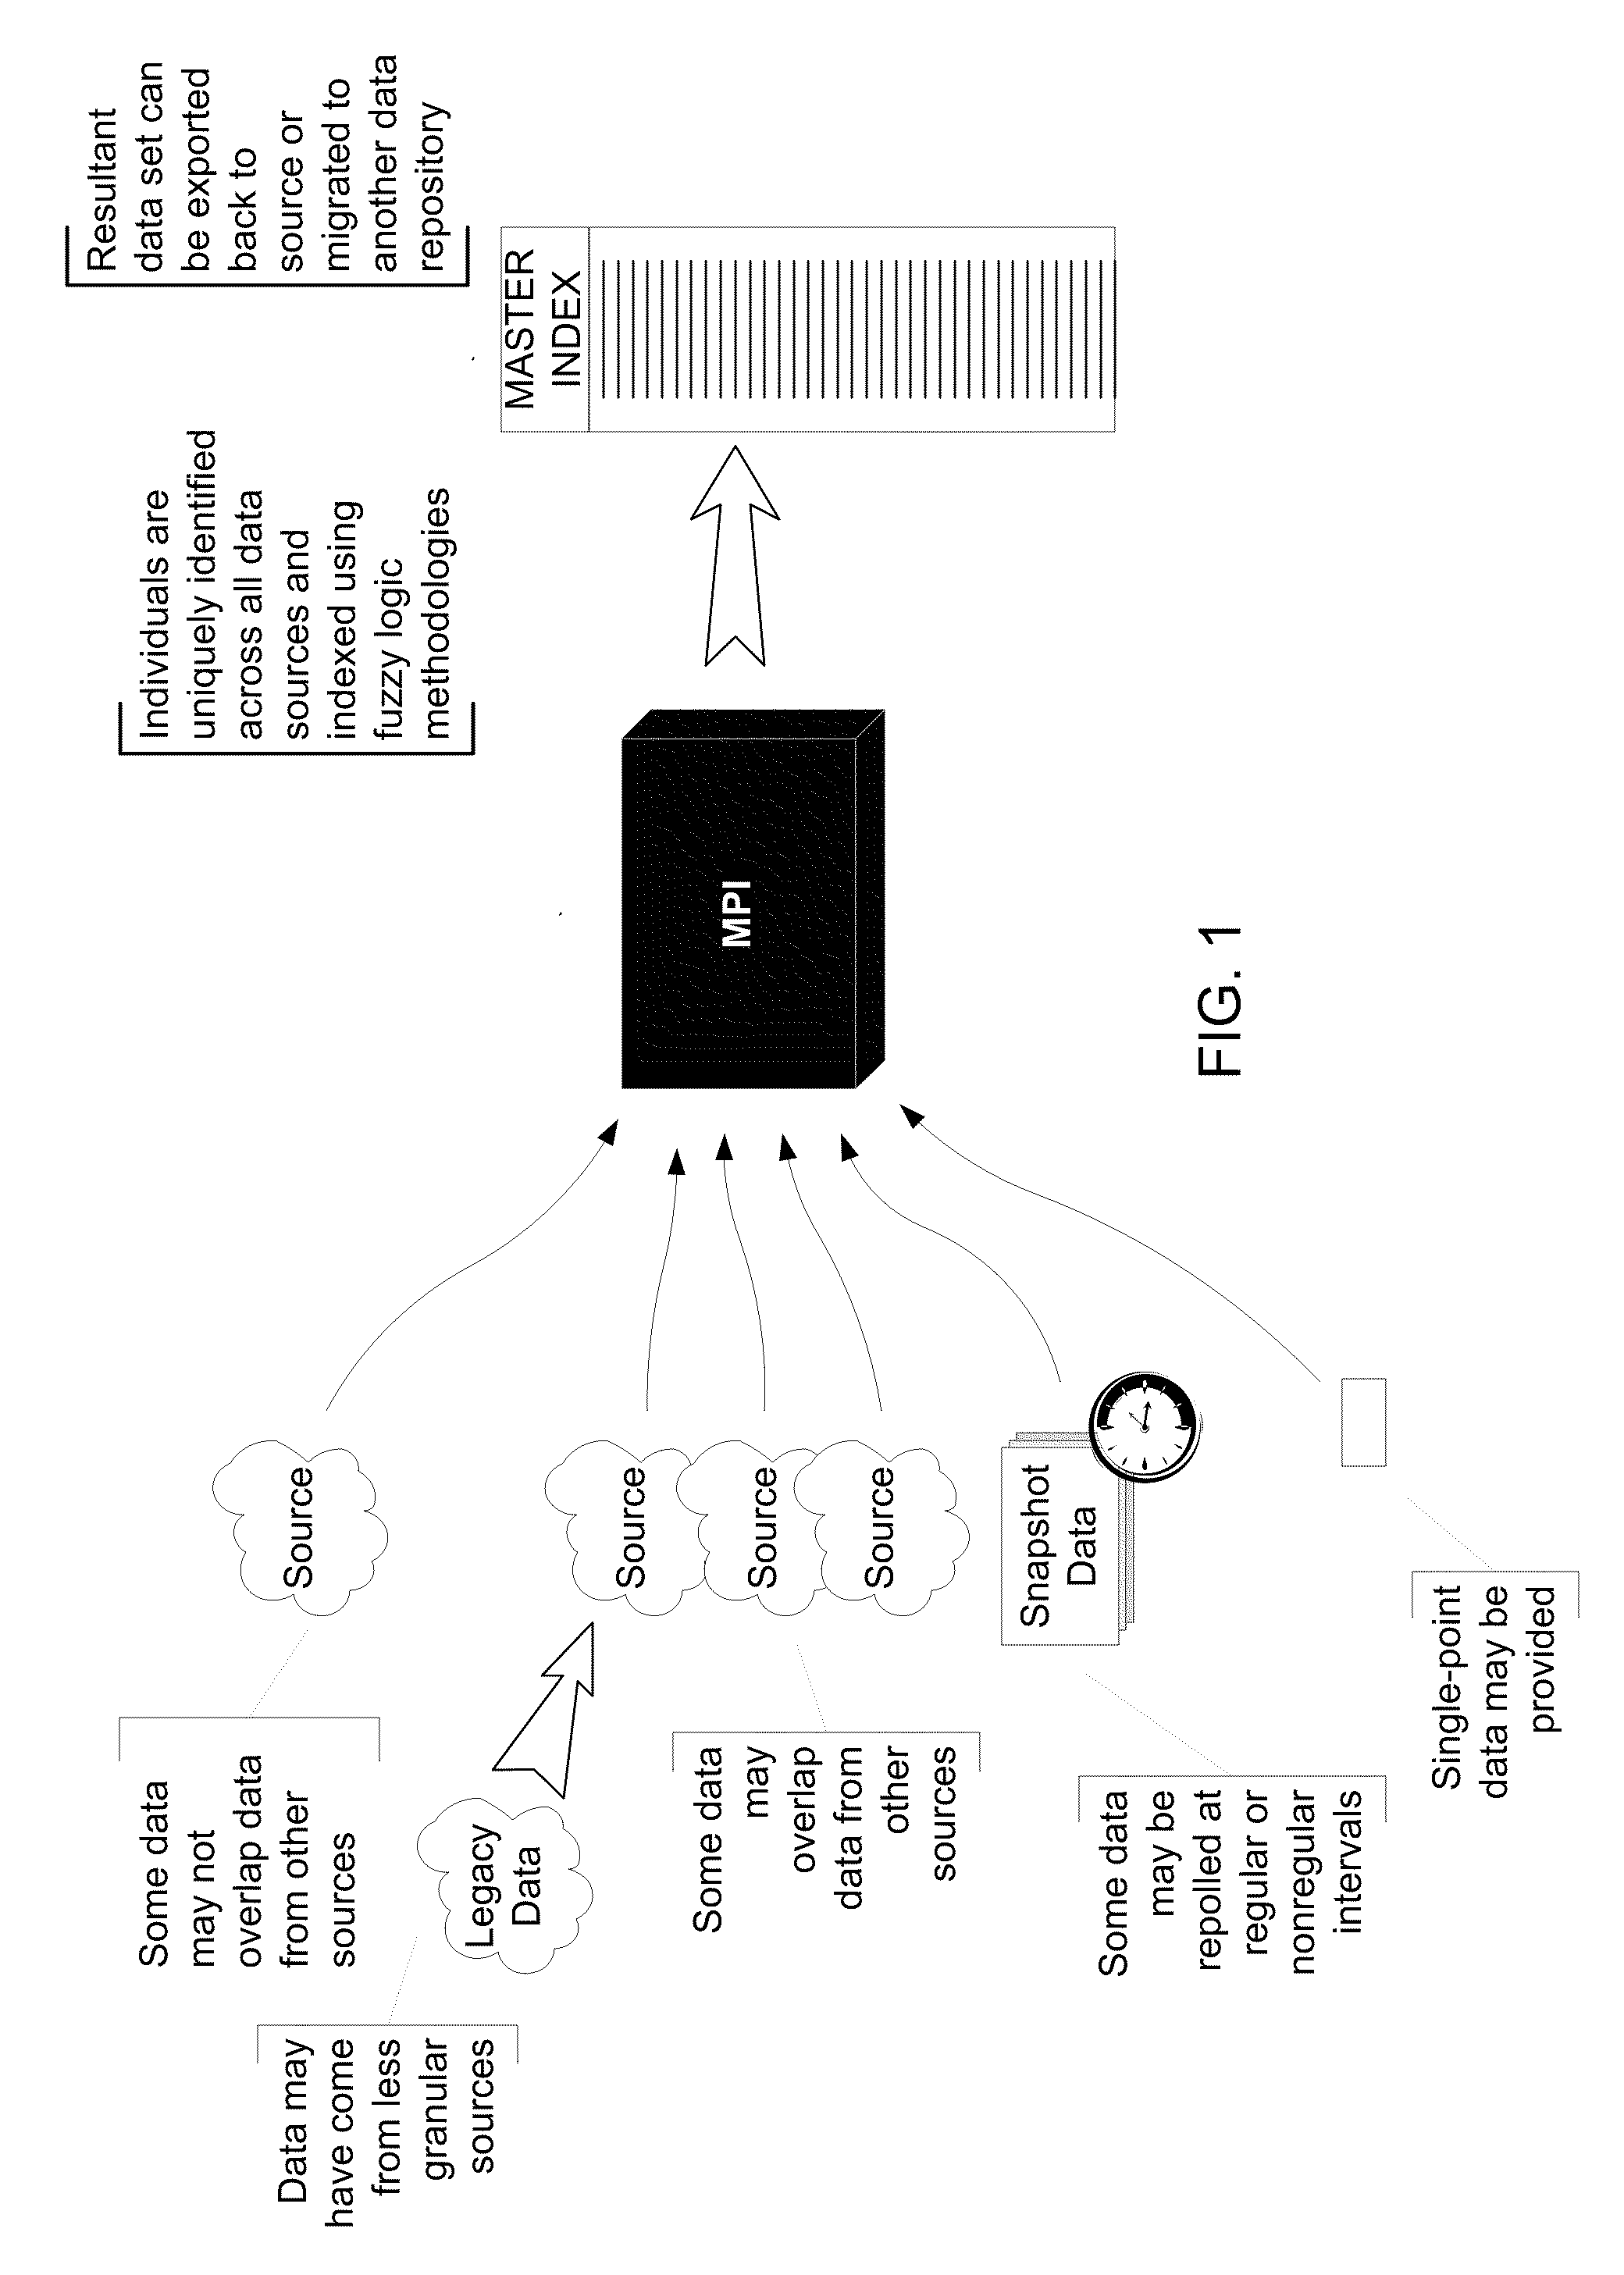 System and Process for Record Duplication Analysis